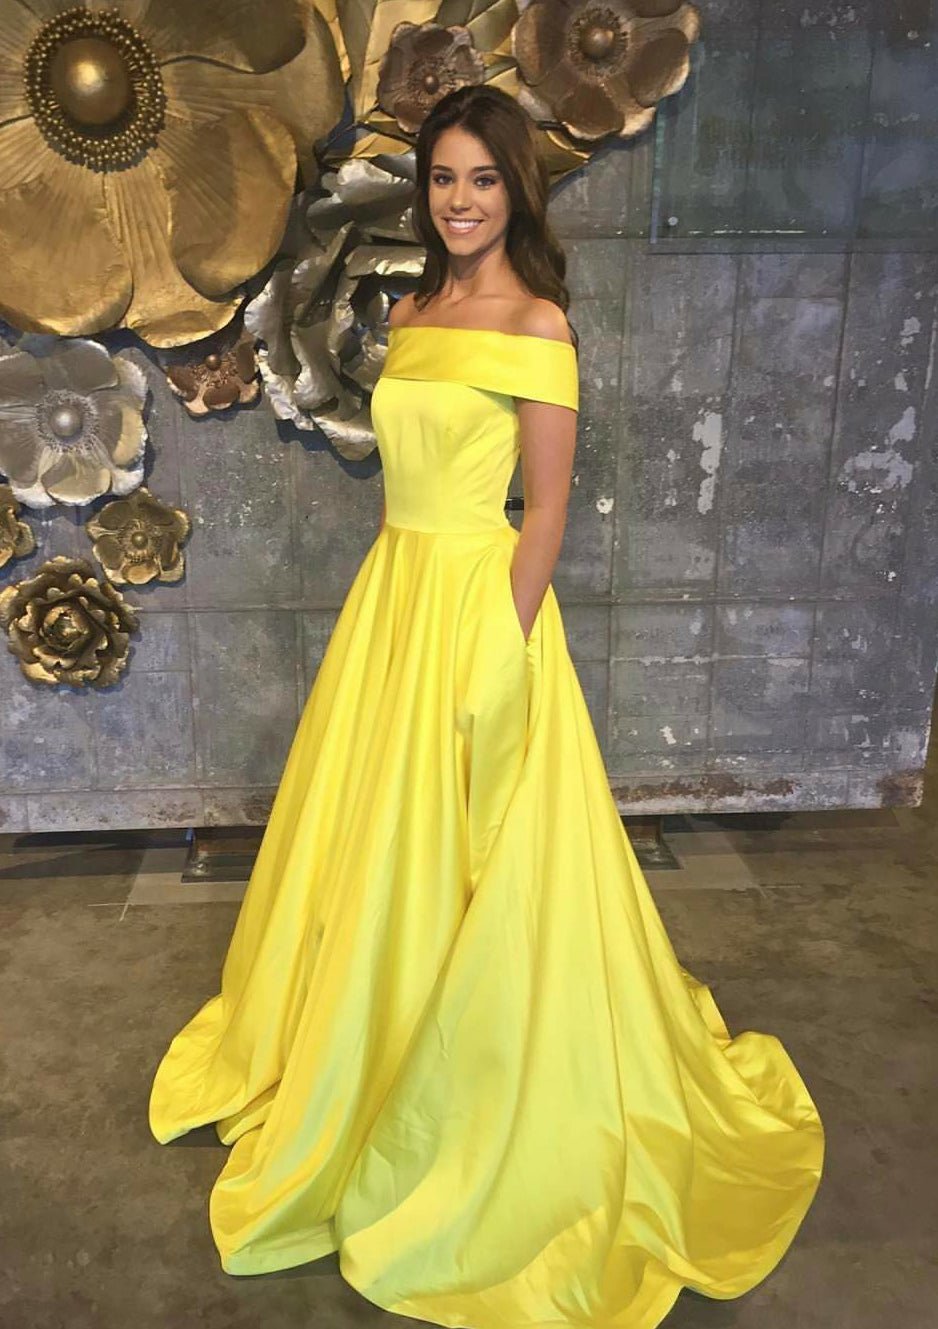 A-line/Princess Off-the-Shoulder Sleeveless Sweep Train Satin Prom Dress With Low Back - dennisdresses